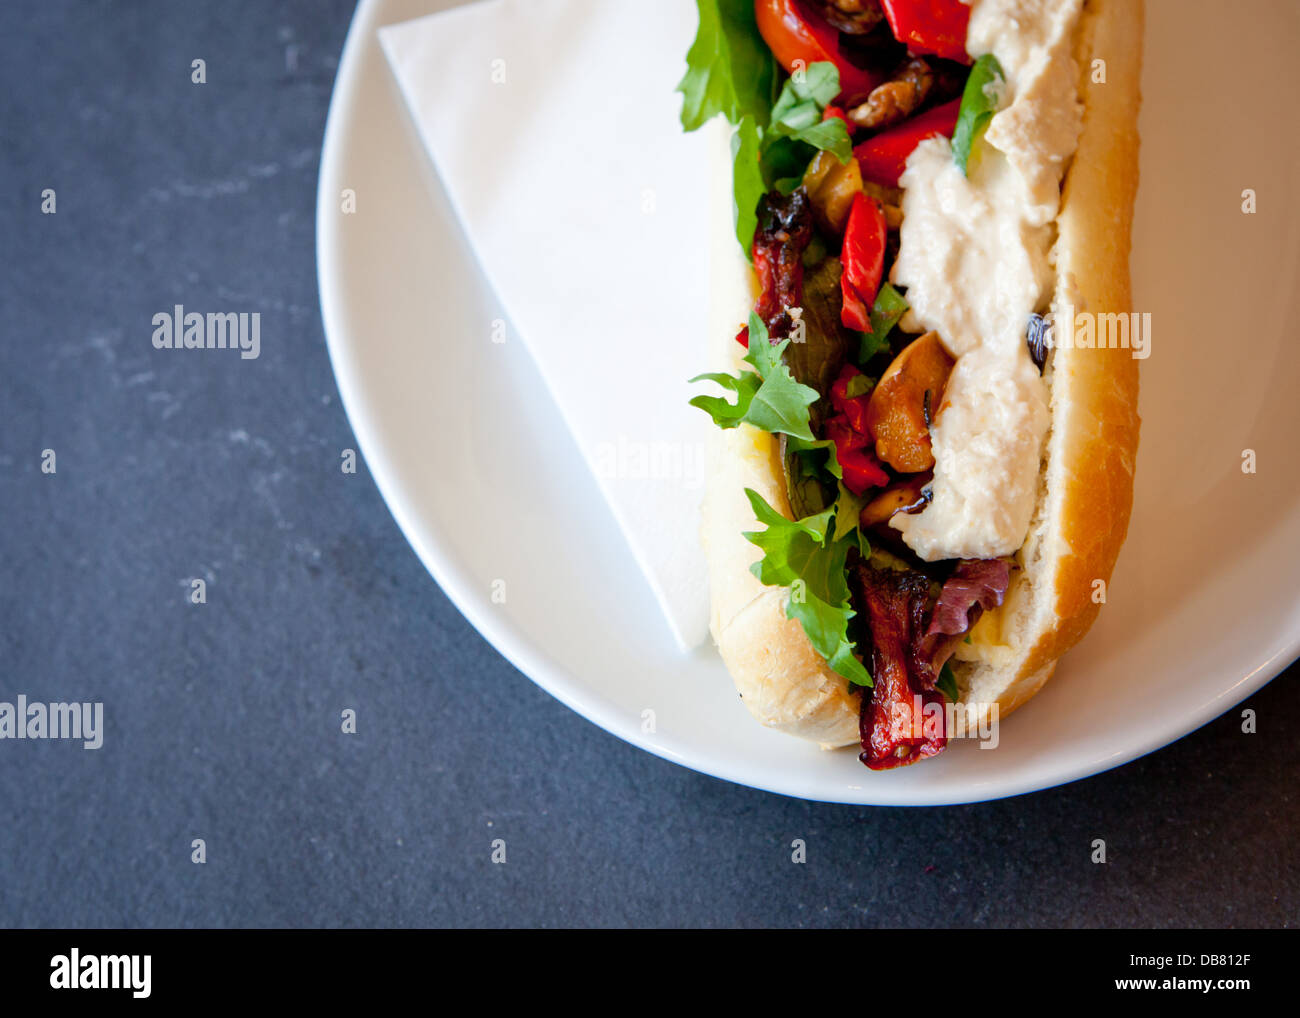 hummus and oven roasted vegetable baguette Stock Photo